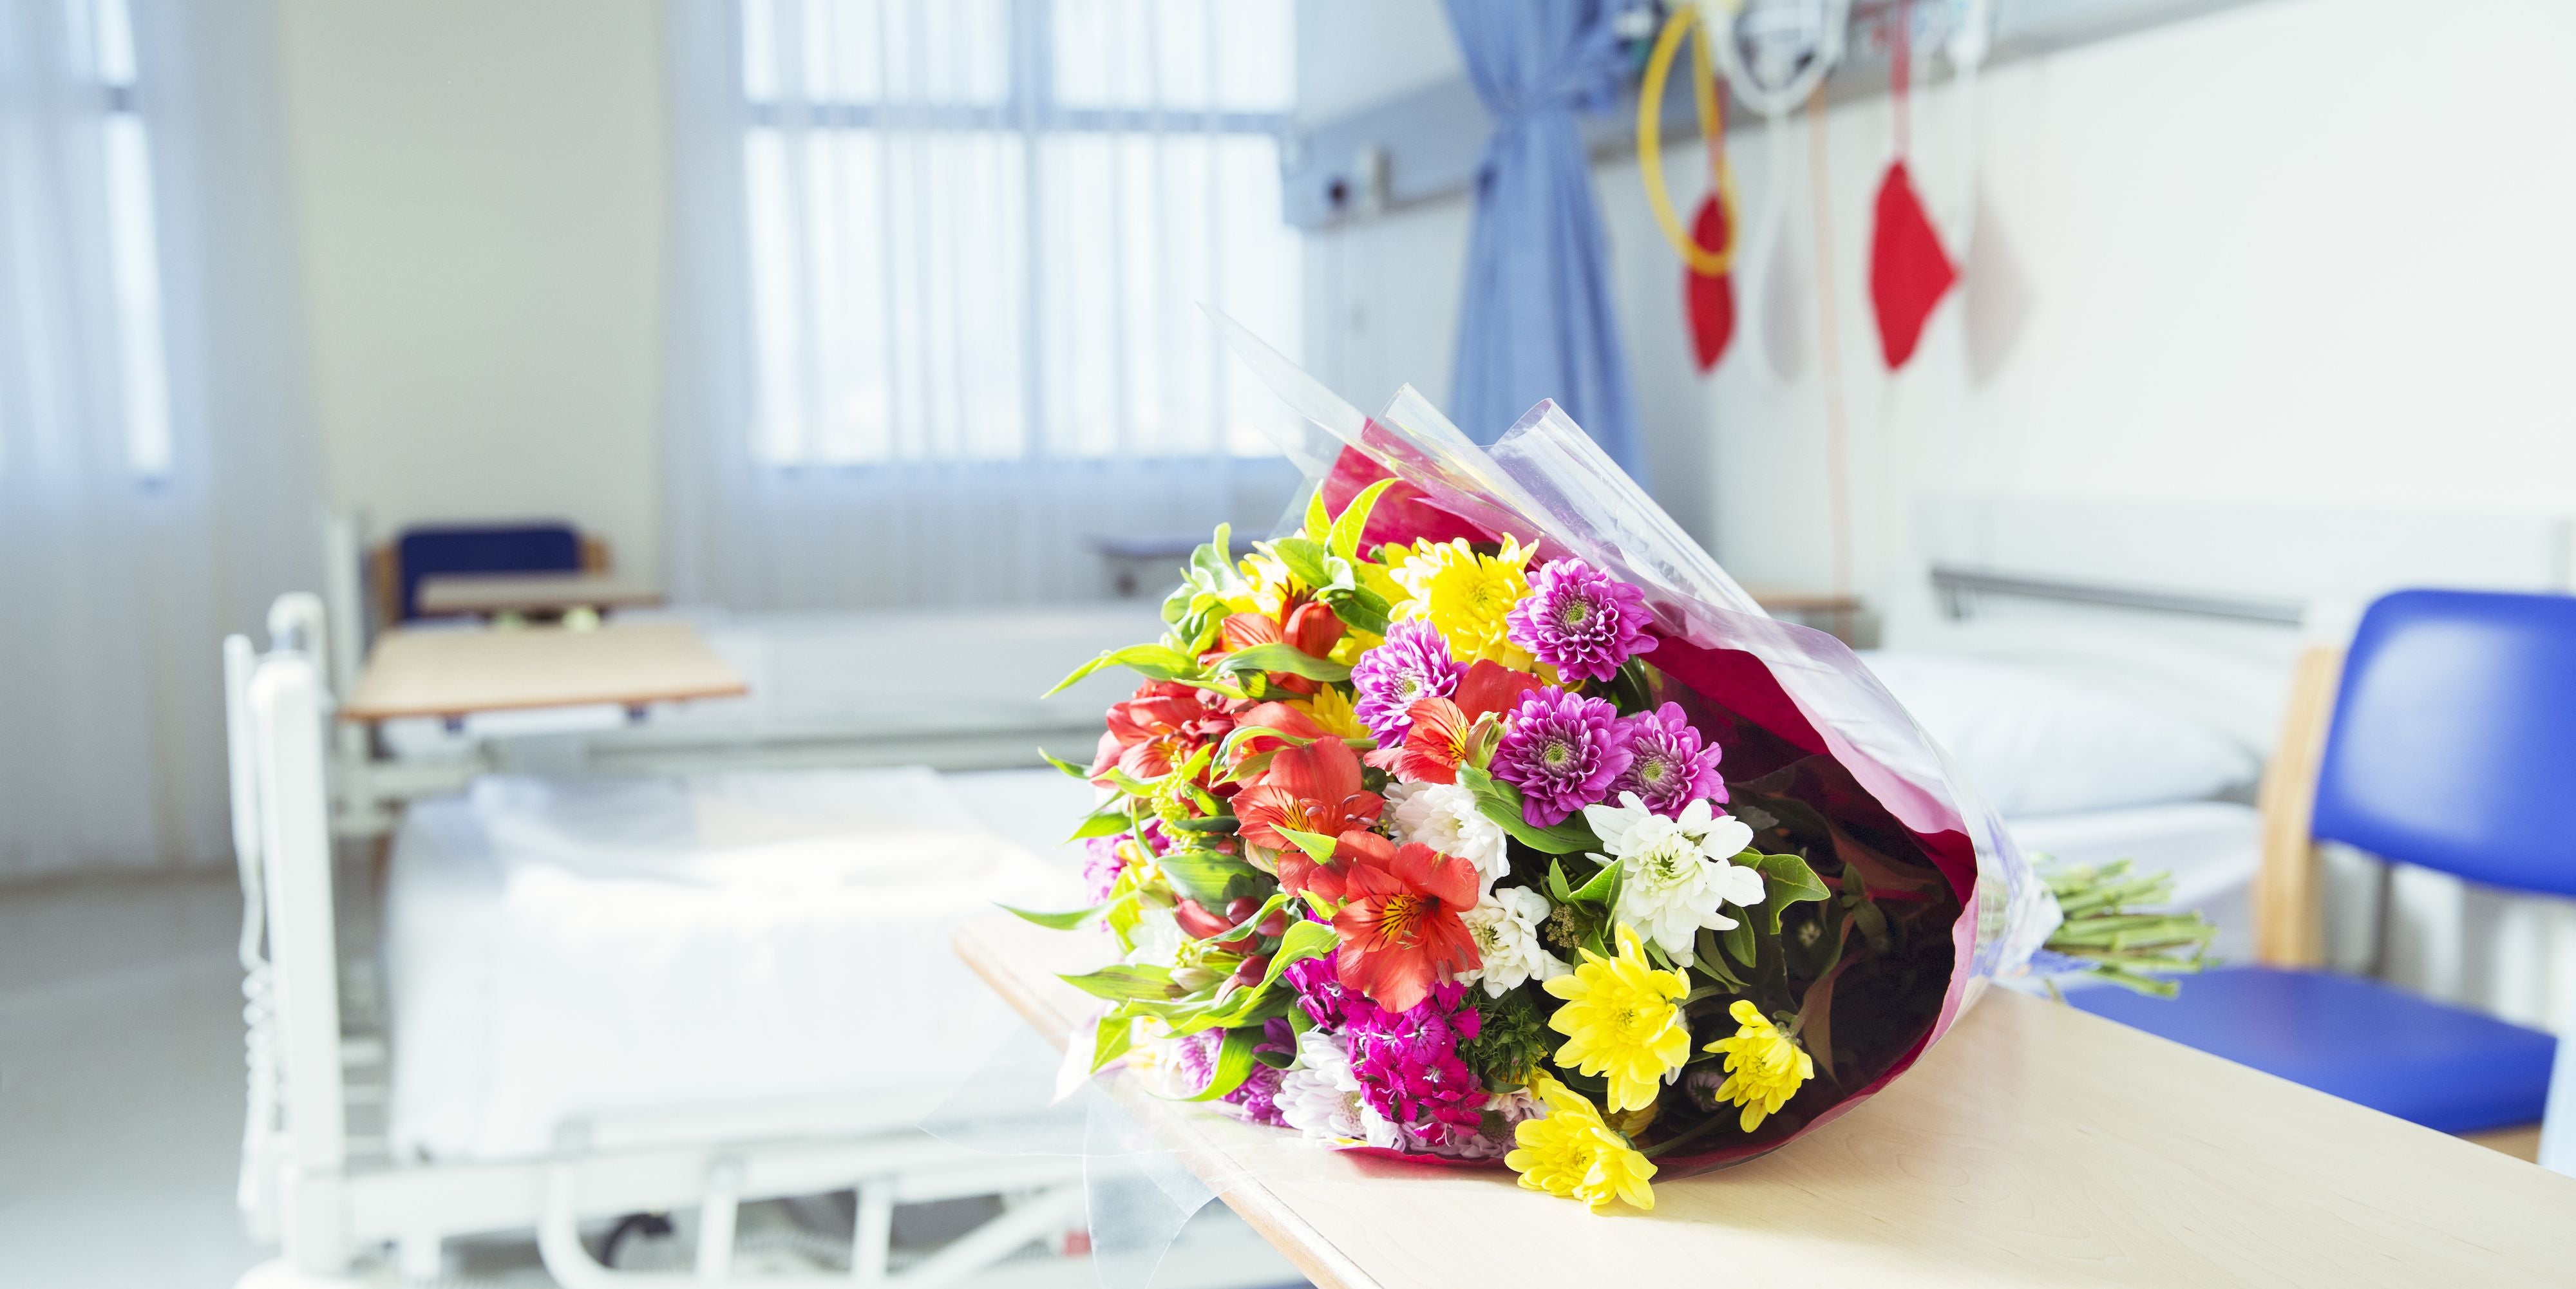 Cancer Patient Visitors Banned from Bringing Fresh Flowers For Risk of Infections - WORLD OF BUZZ